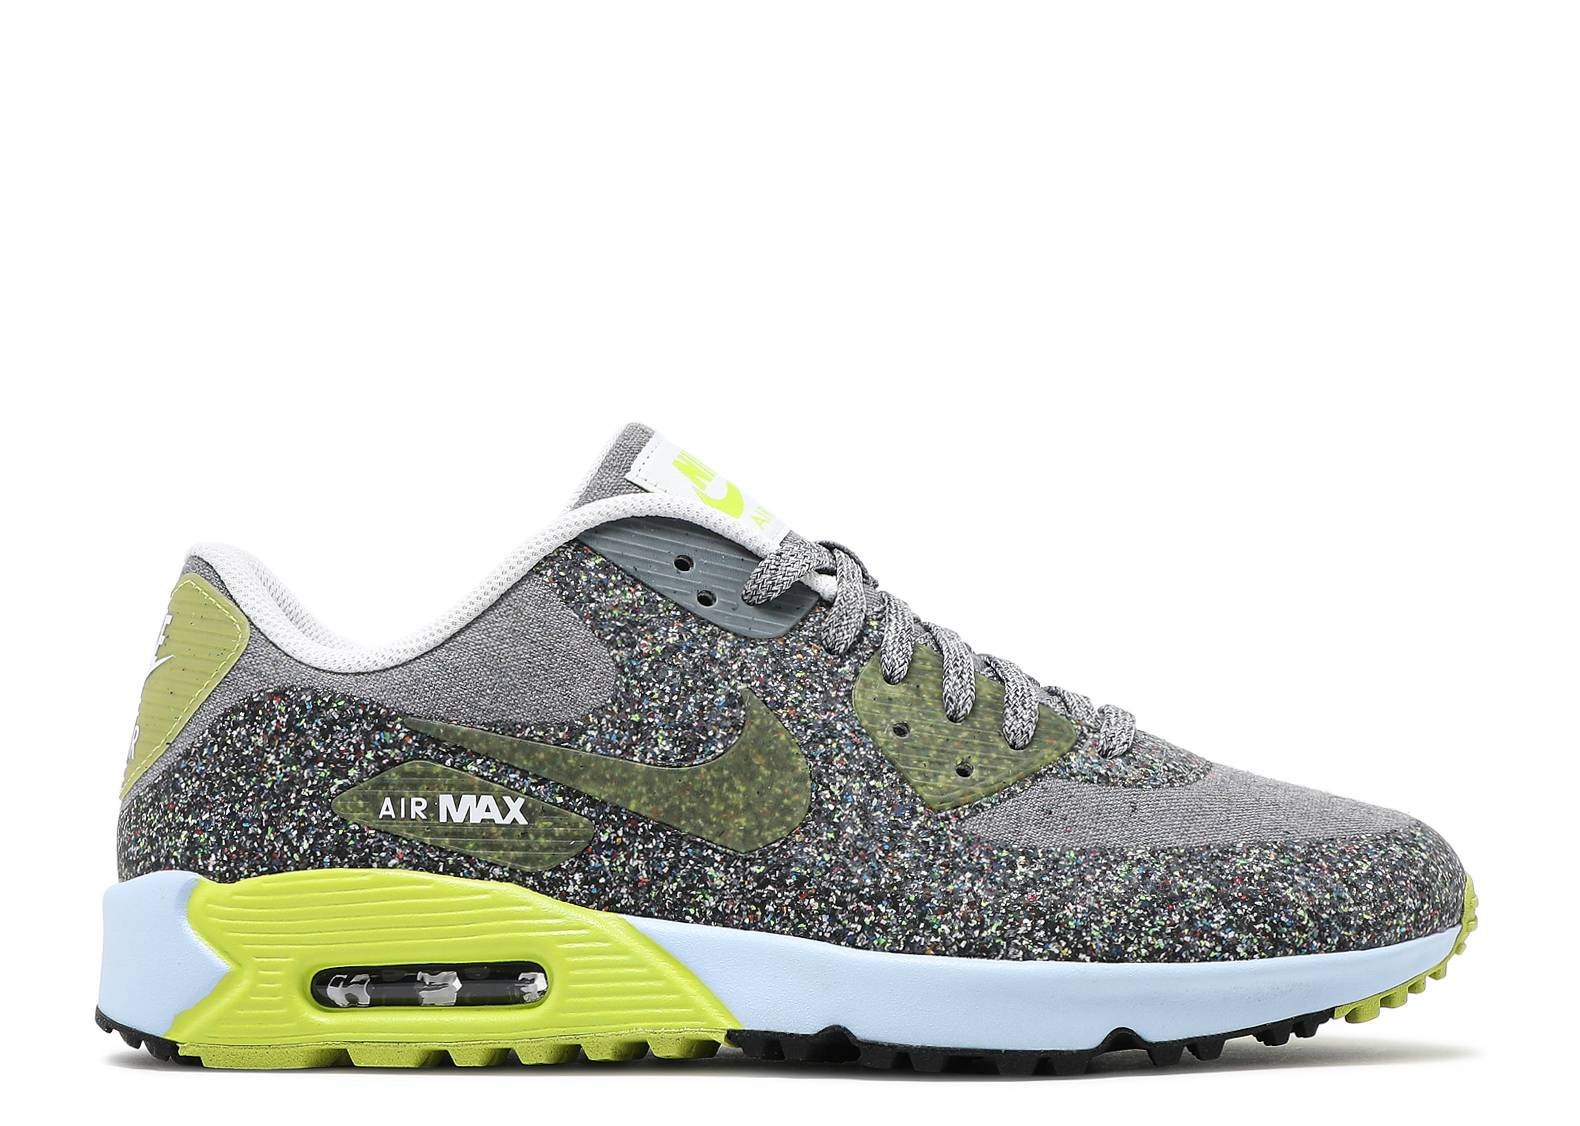 Air Max 90 Golf NRG 'Dust Speckled'